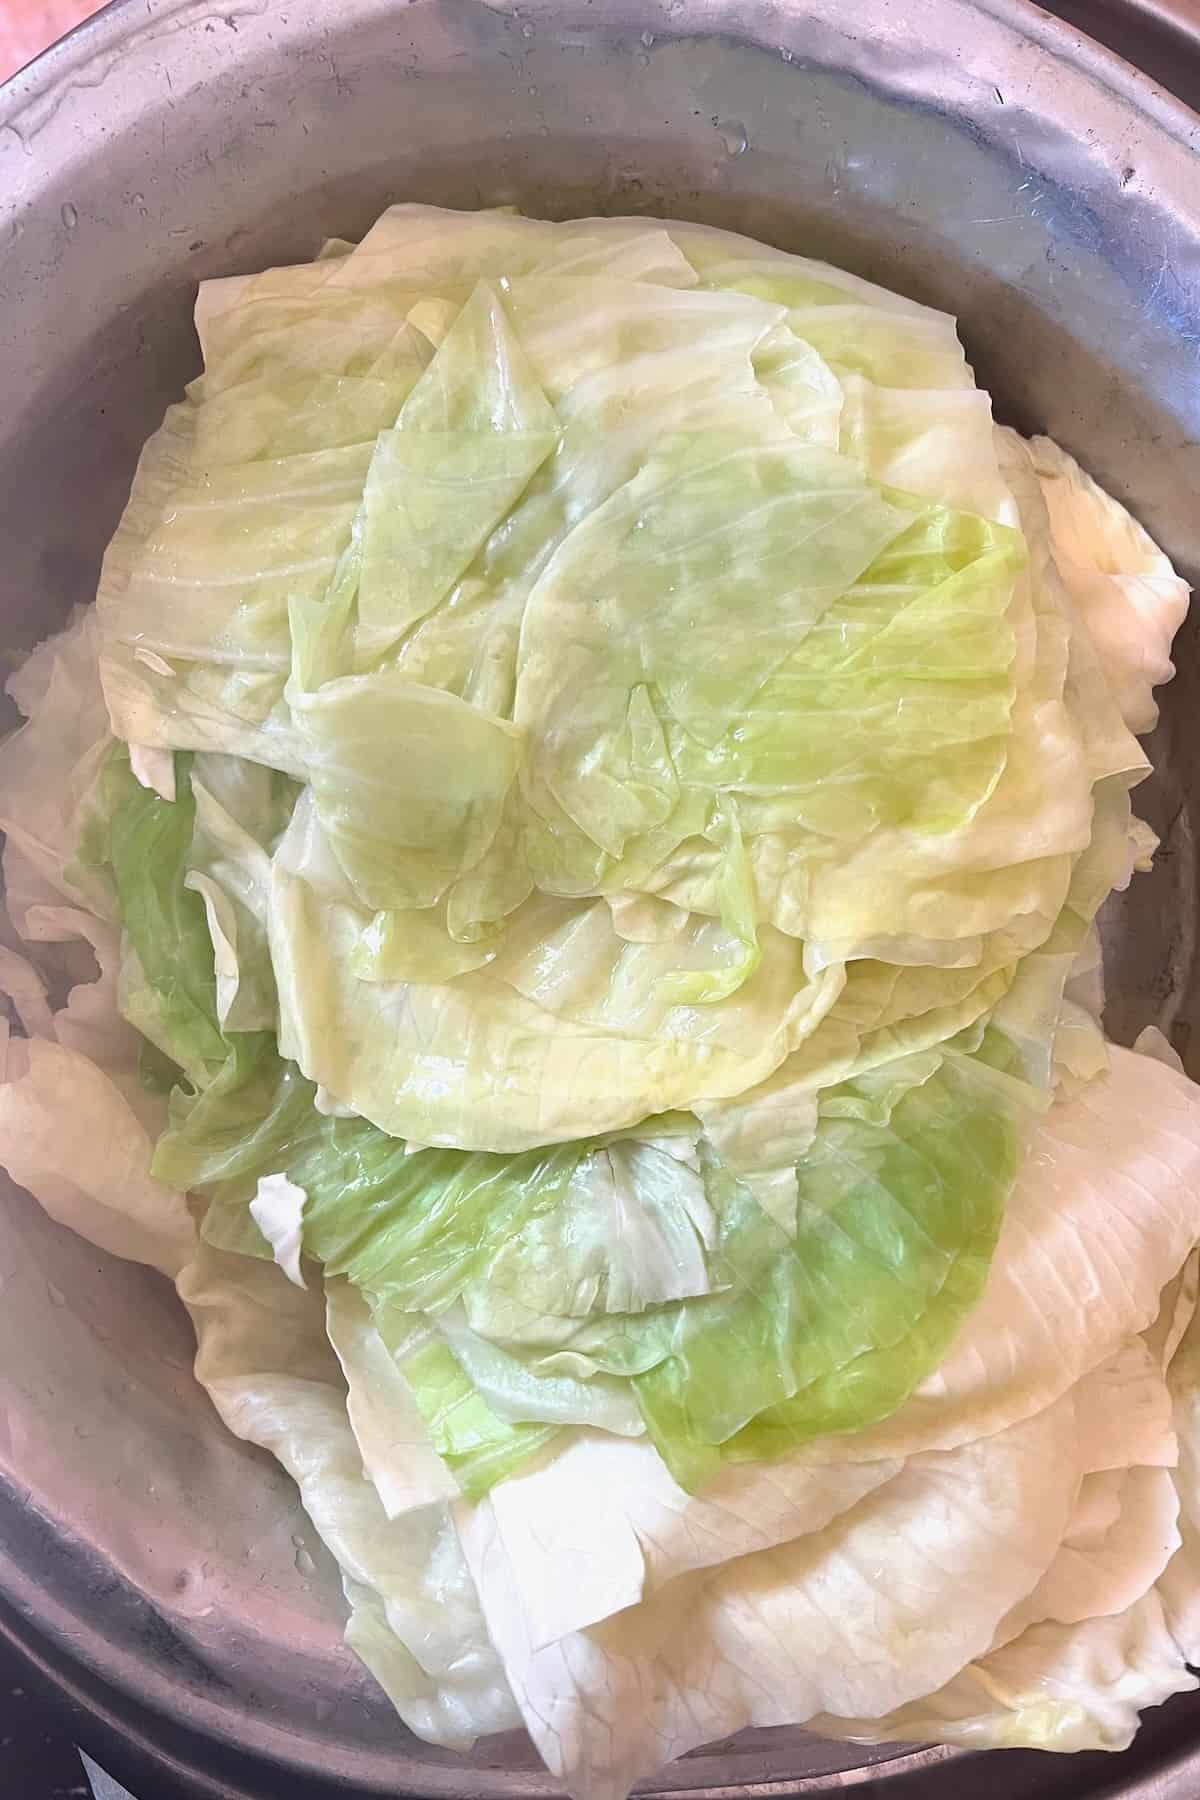 Separated cabbage leaves